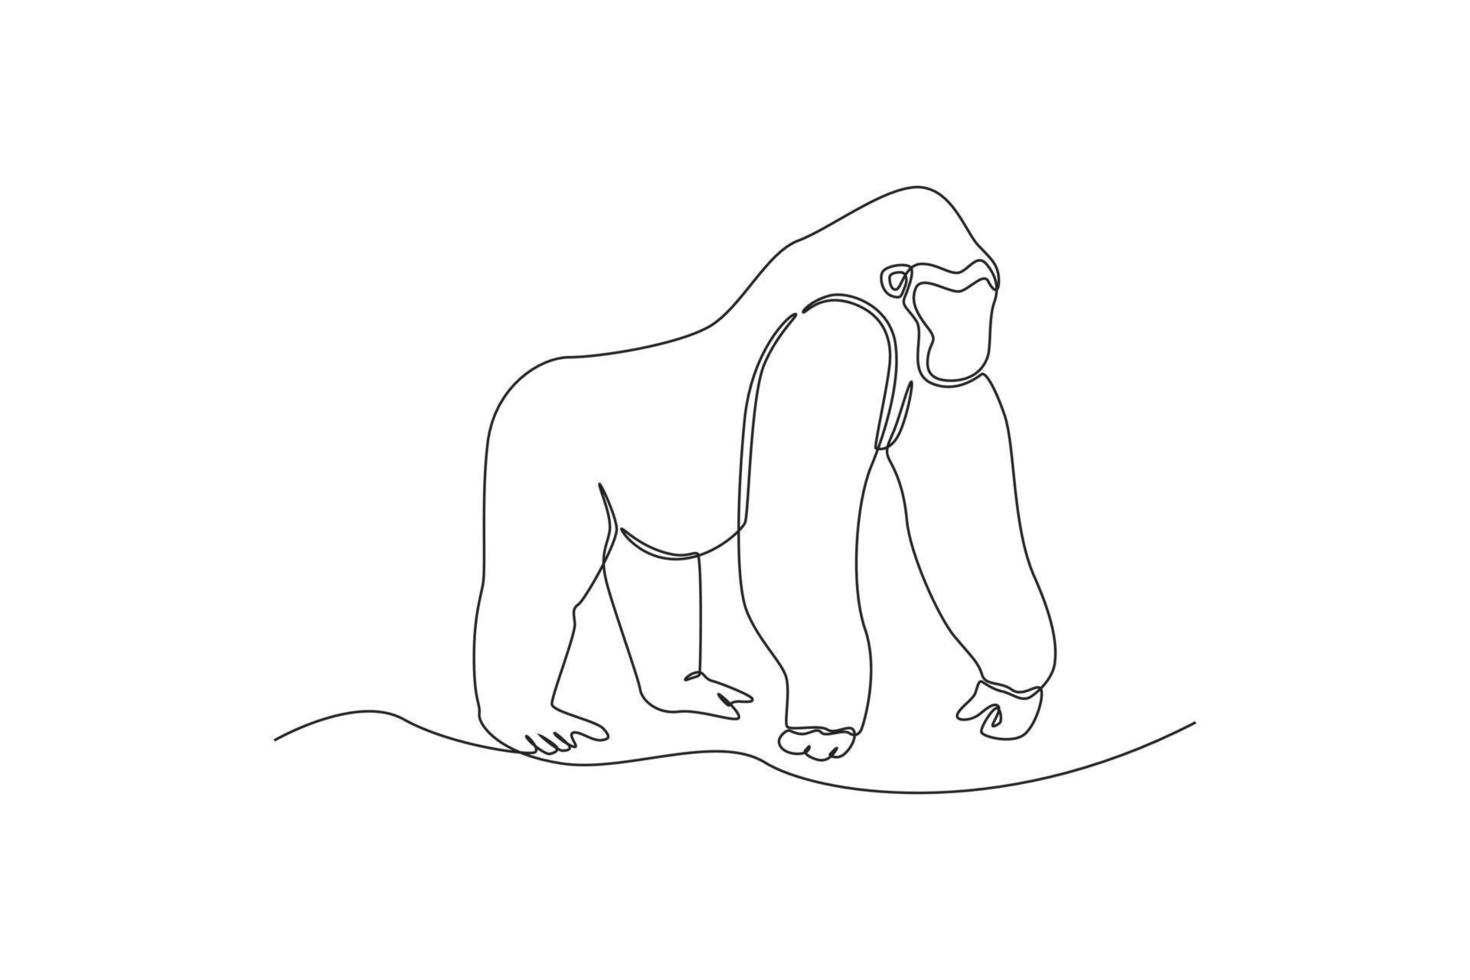 One continuous line drawing of a gorilla. Animal concept. Single line draw design vector graphic illustration.